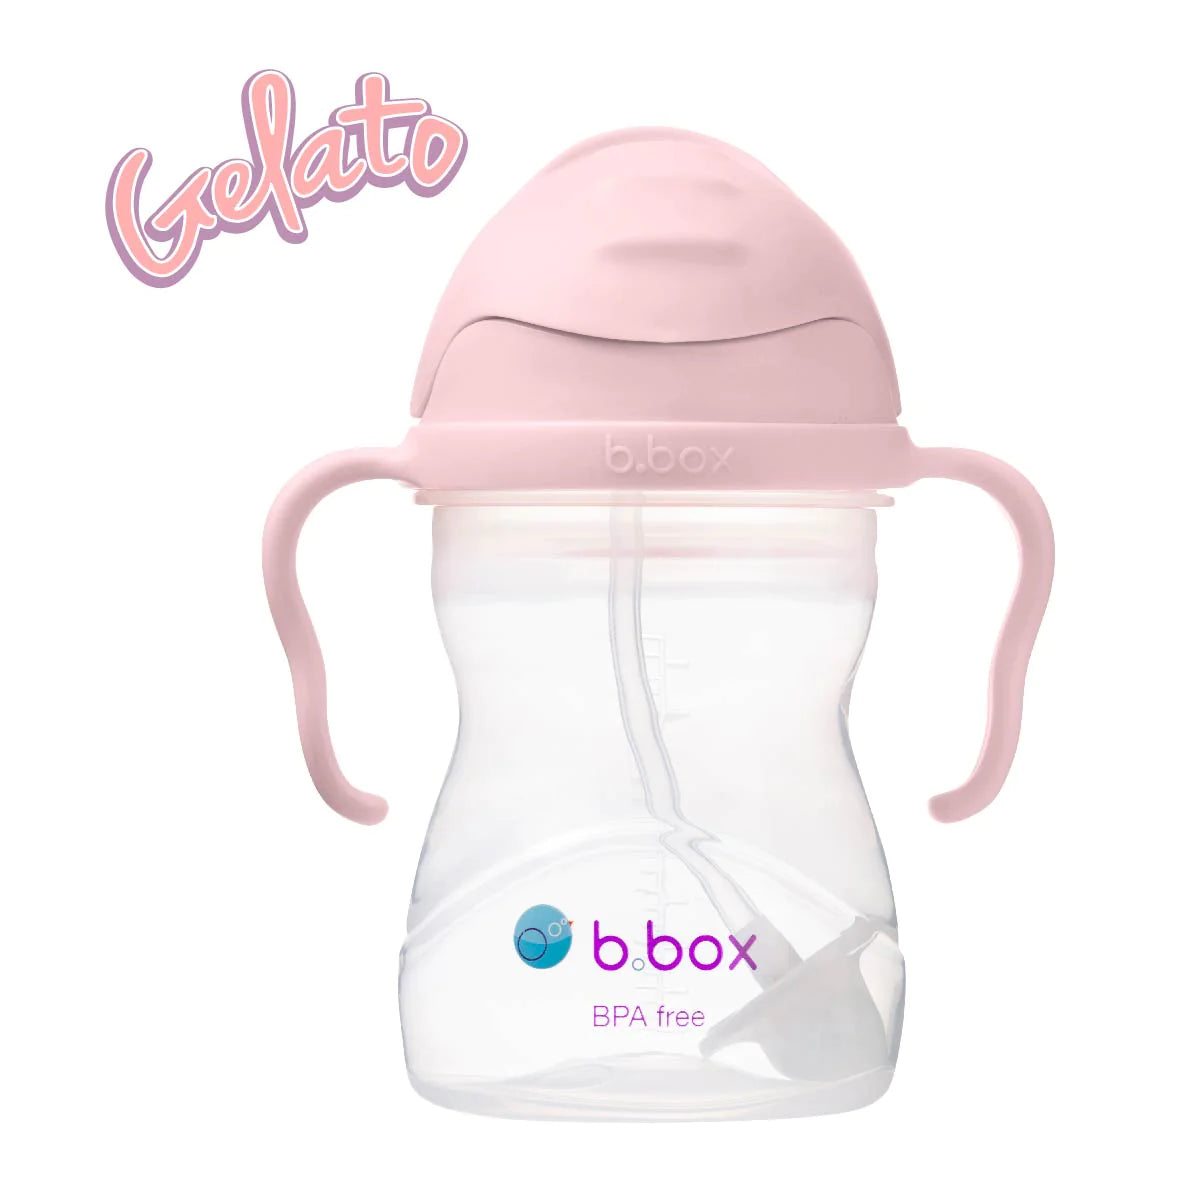 b.box Sippy Cup in Blush available at Bear & Moo